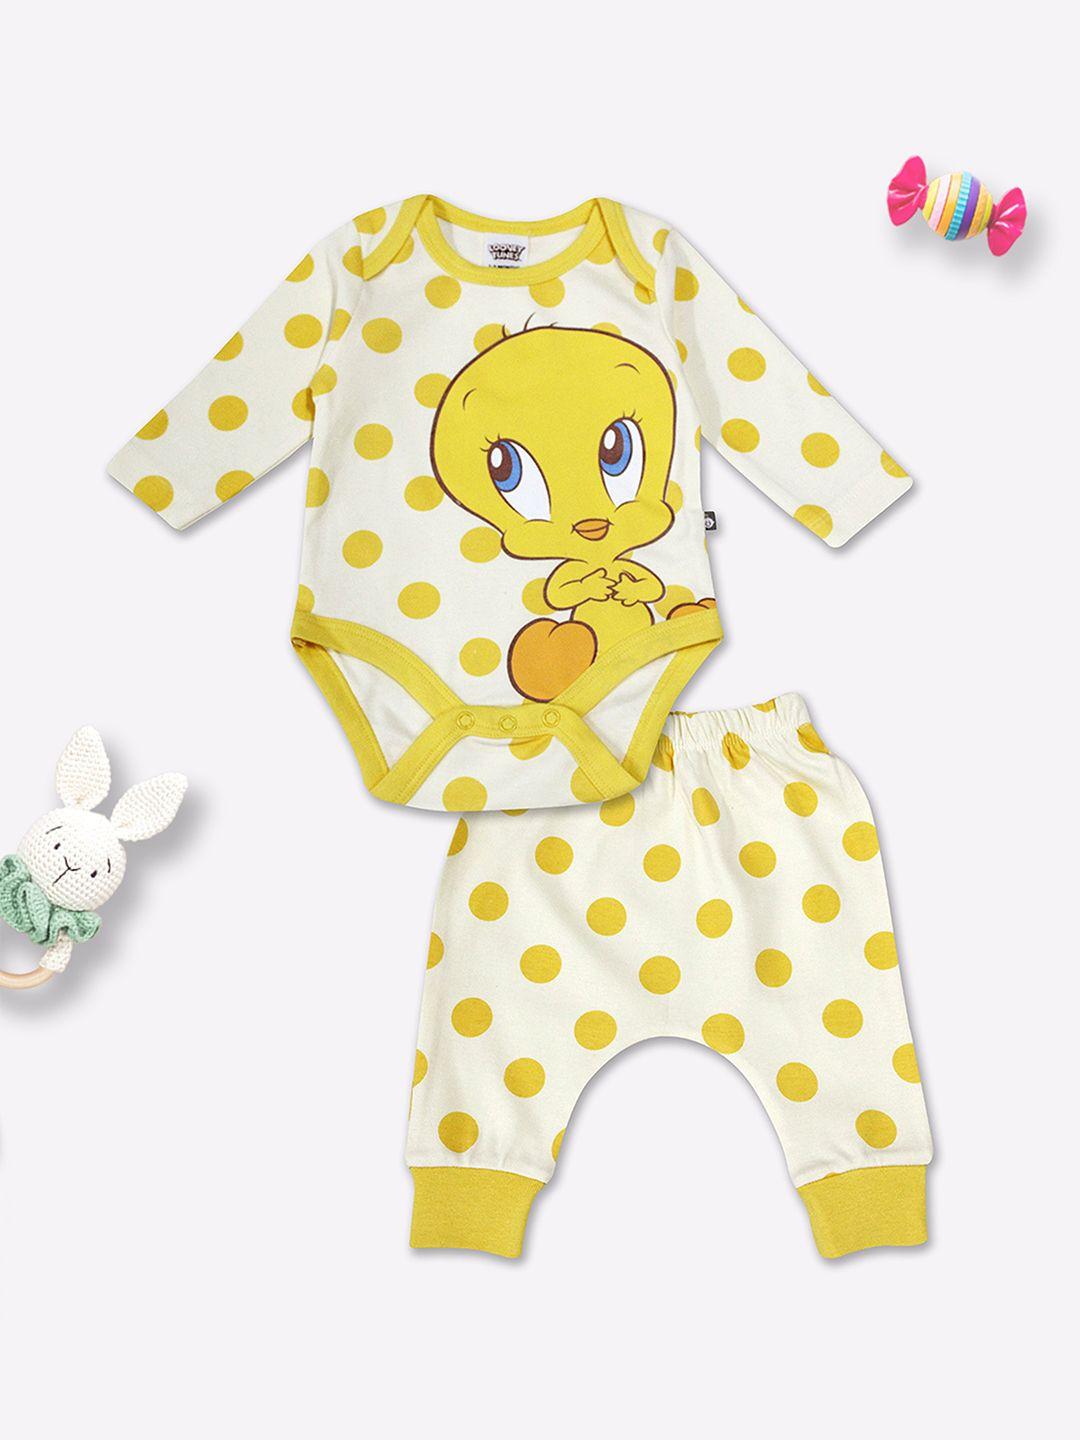 moms-love-infants-tweety-printed-pure-cotton-bodysuit-with-trousers